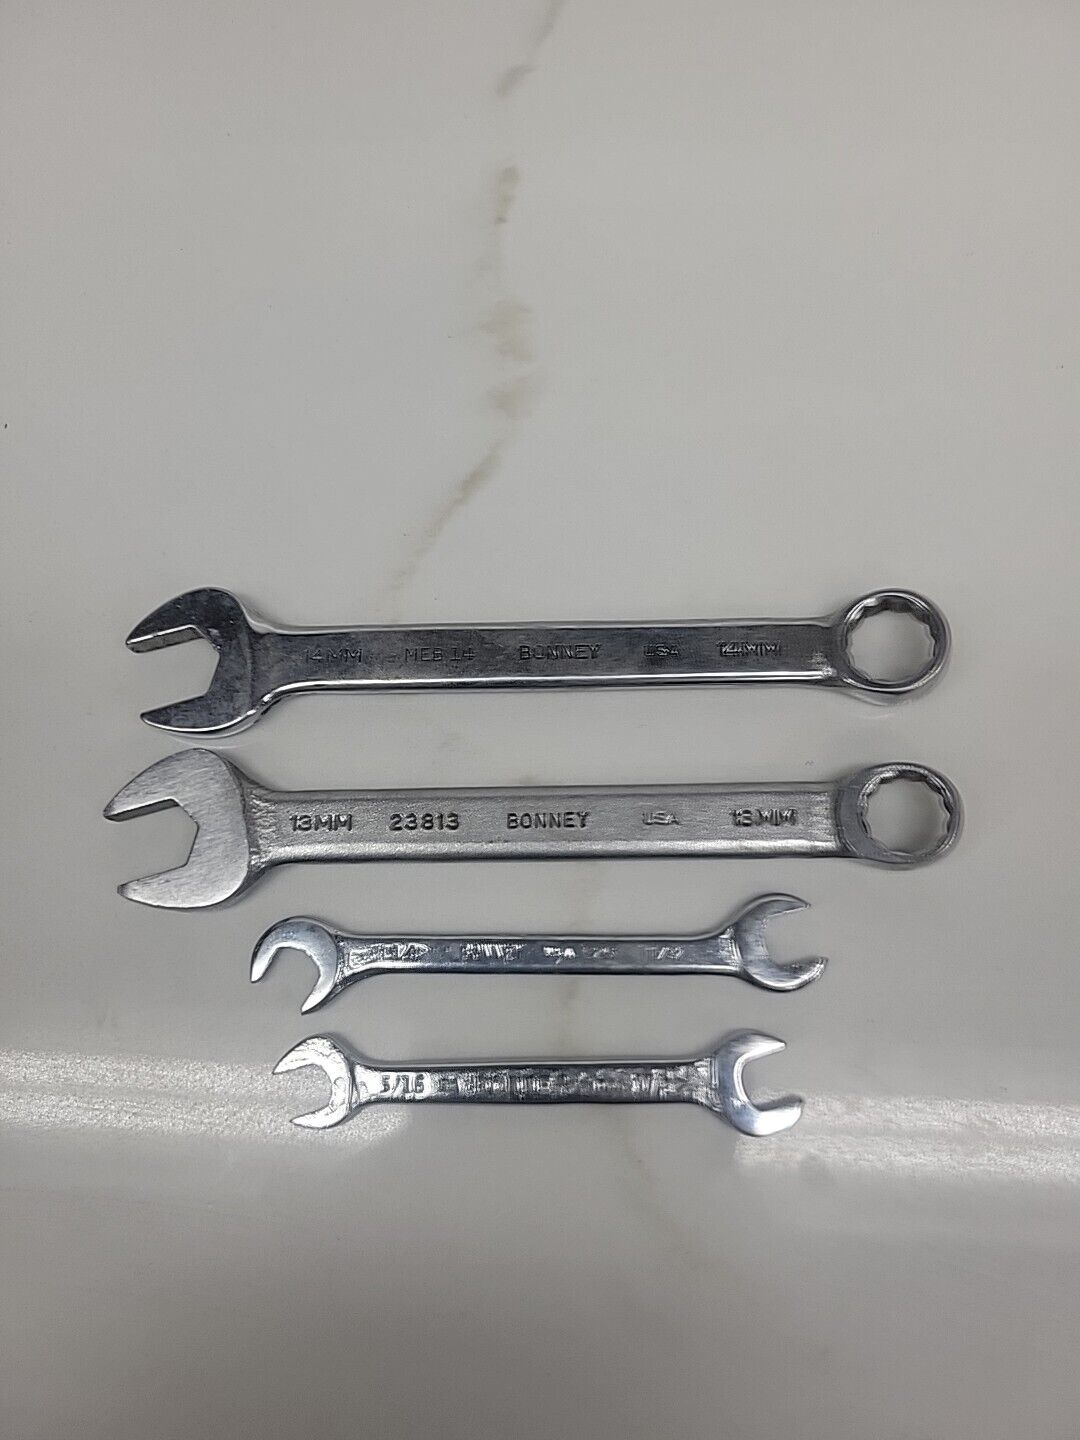 4- VINTAGE BONNEY COMBINATION WRENCHES 14mm,13mm,3/8,5/16,11/32 